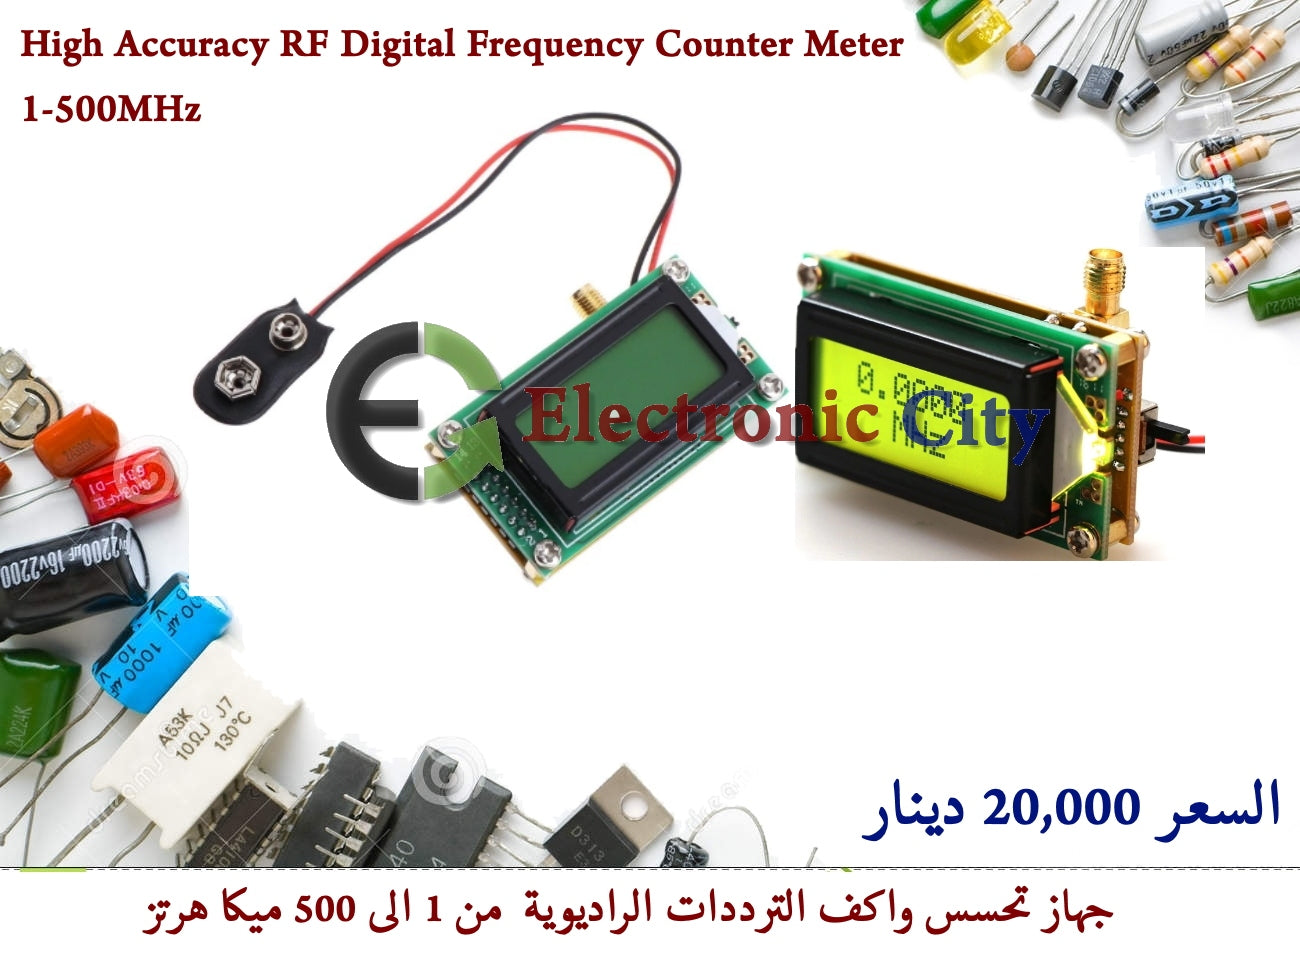 High Accuracy RF Digital Frequency Counter Meter 1-500MHz